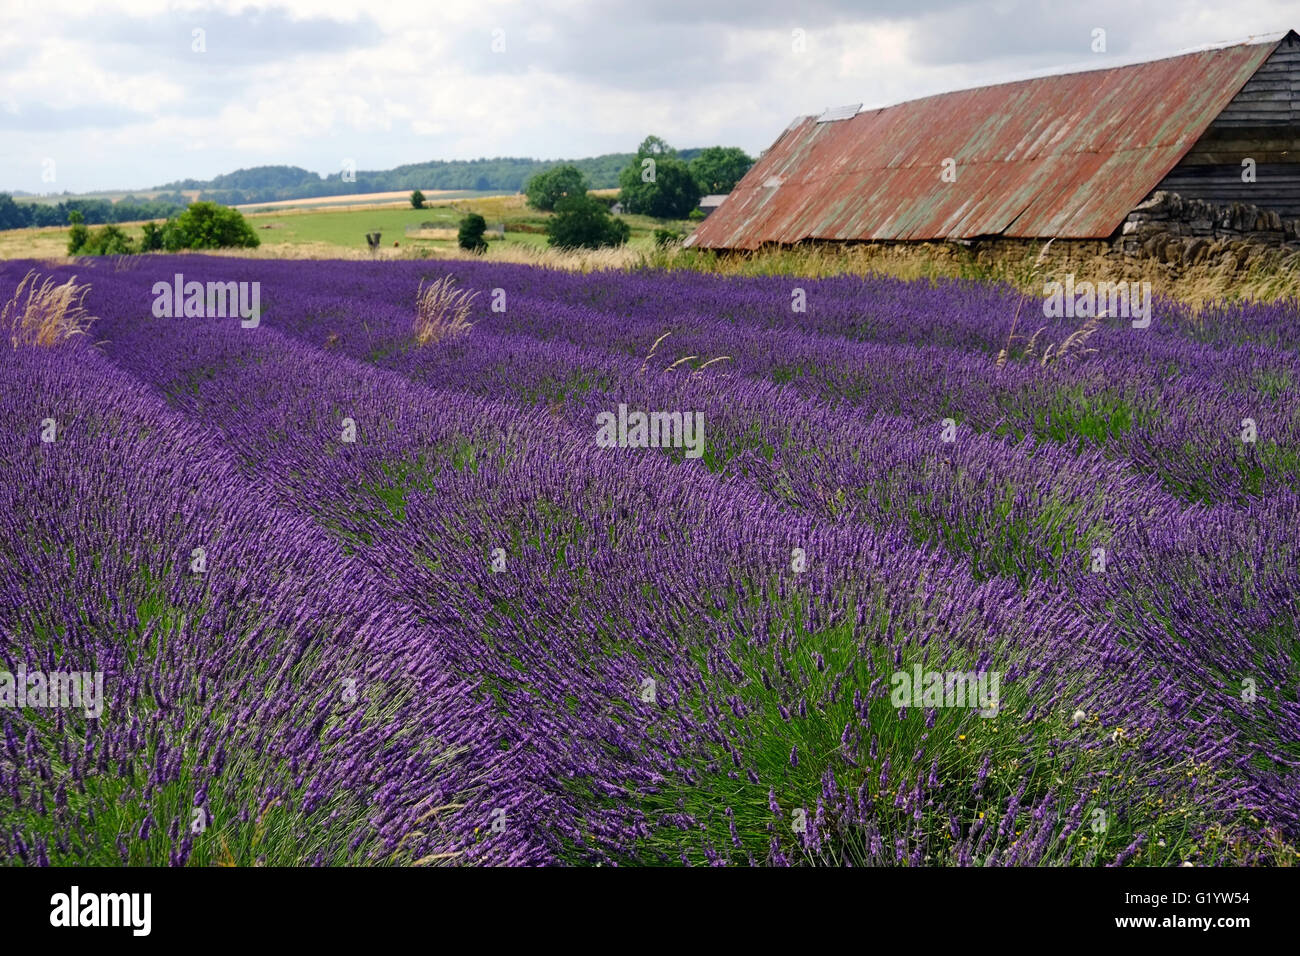 Rows of lavender at Snowshill farm, Gloucestershire, England, UK. Stock Photo